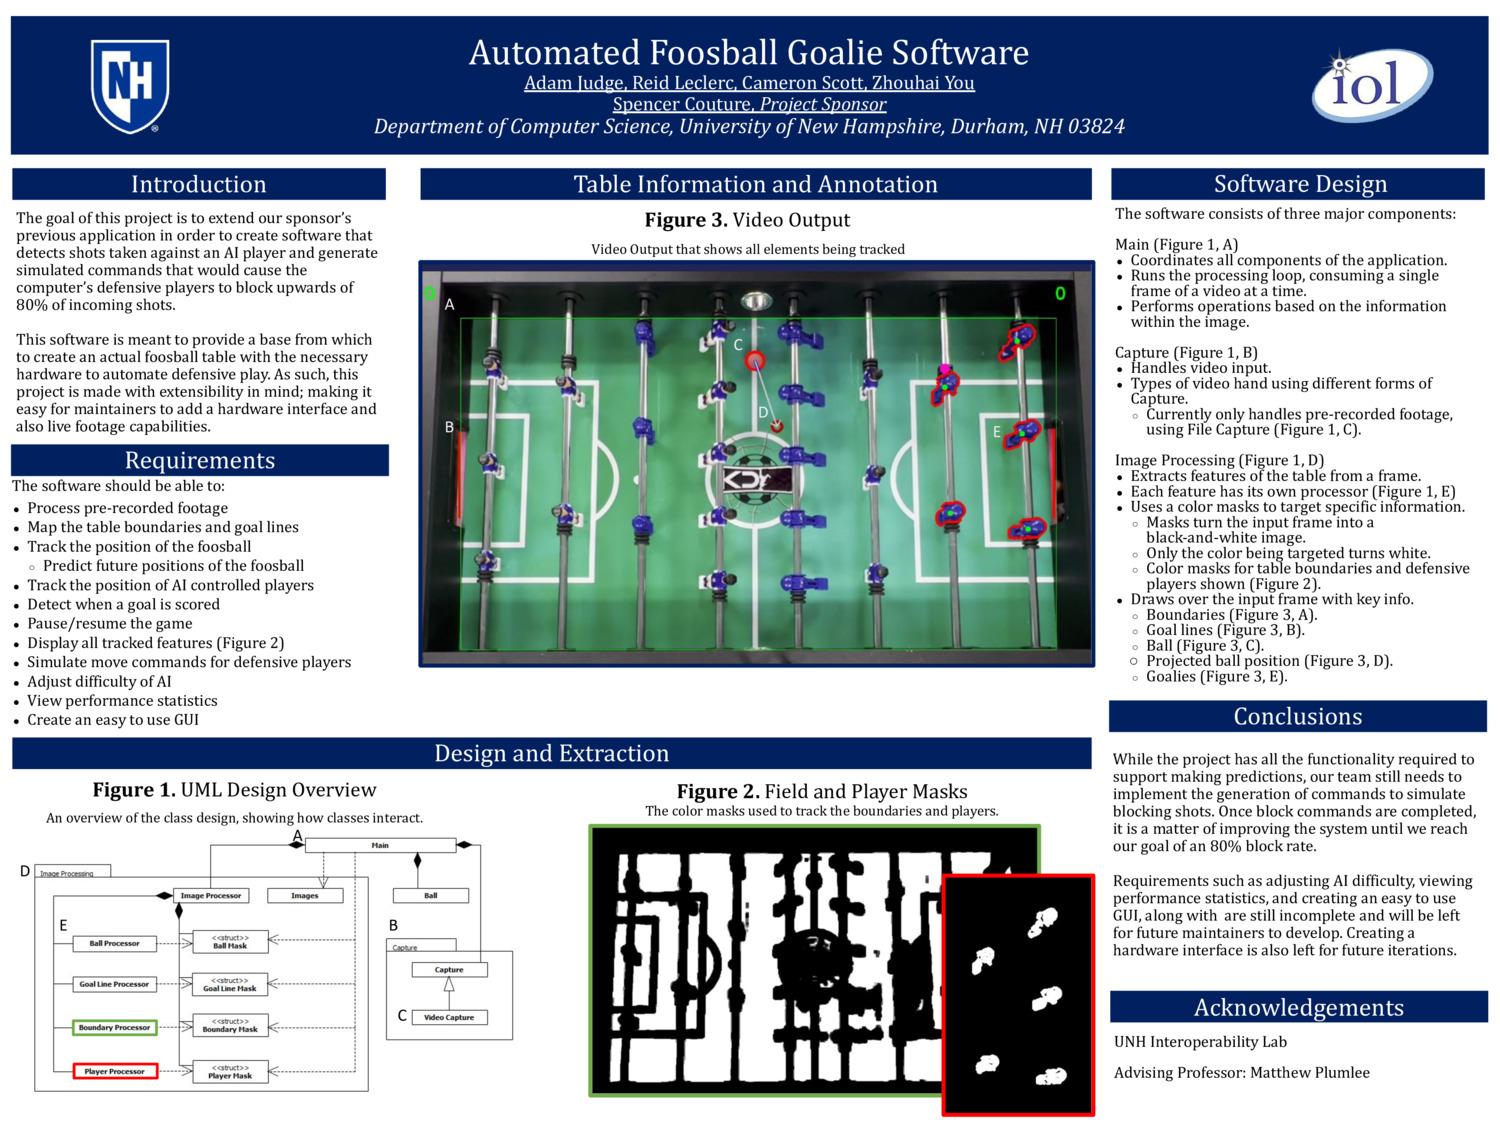 Automated Foosball Goalie Software by rjl1045